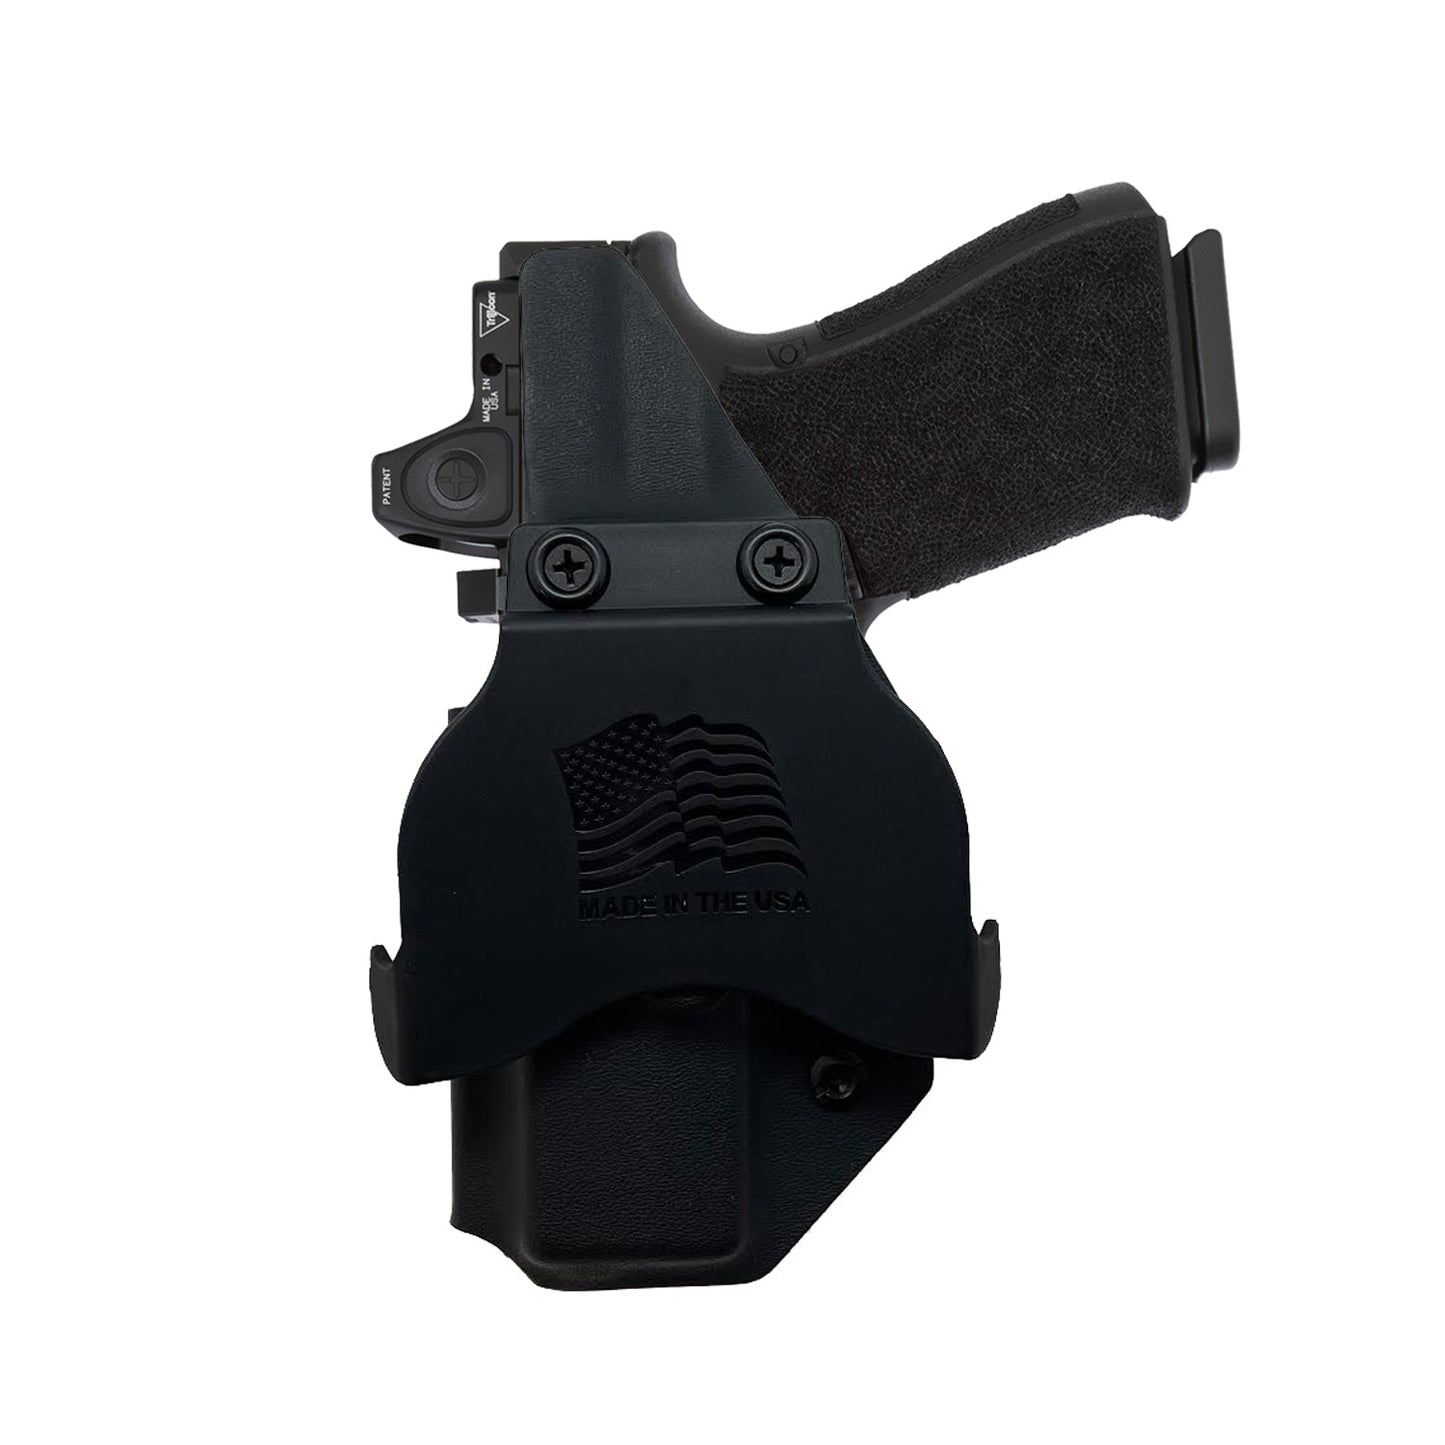 SIG P365/ P365X With XSC Light OWB (Outside The Waistband Holster)